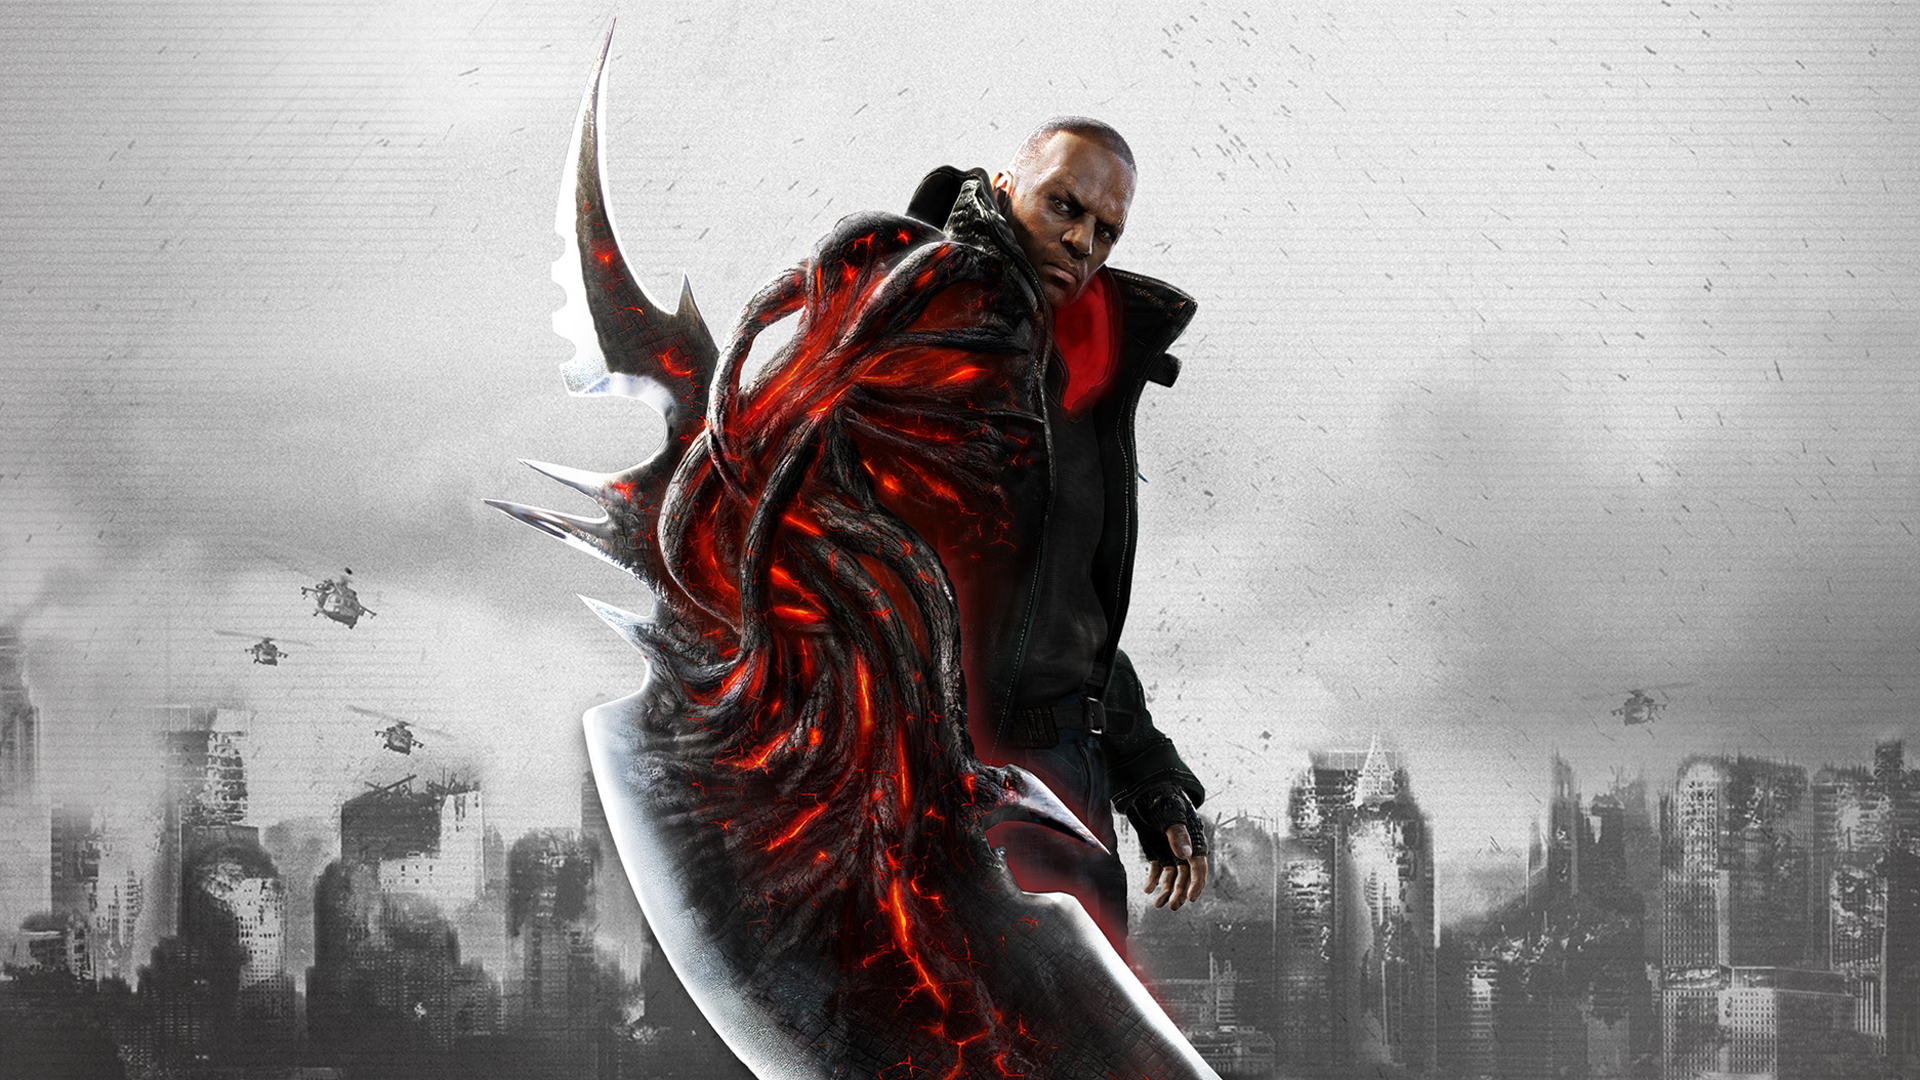 30+ Prototype 2 HD Wallpapers and Backgrounds